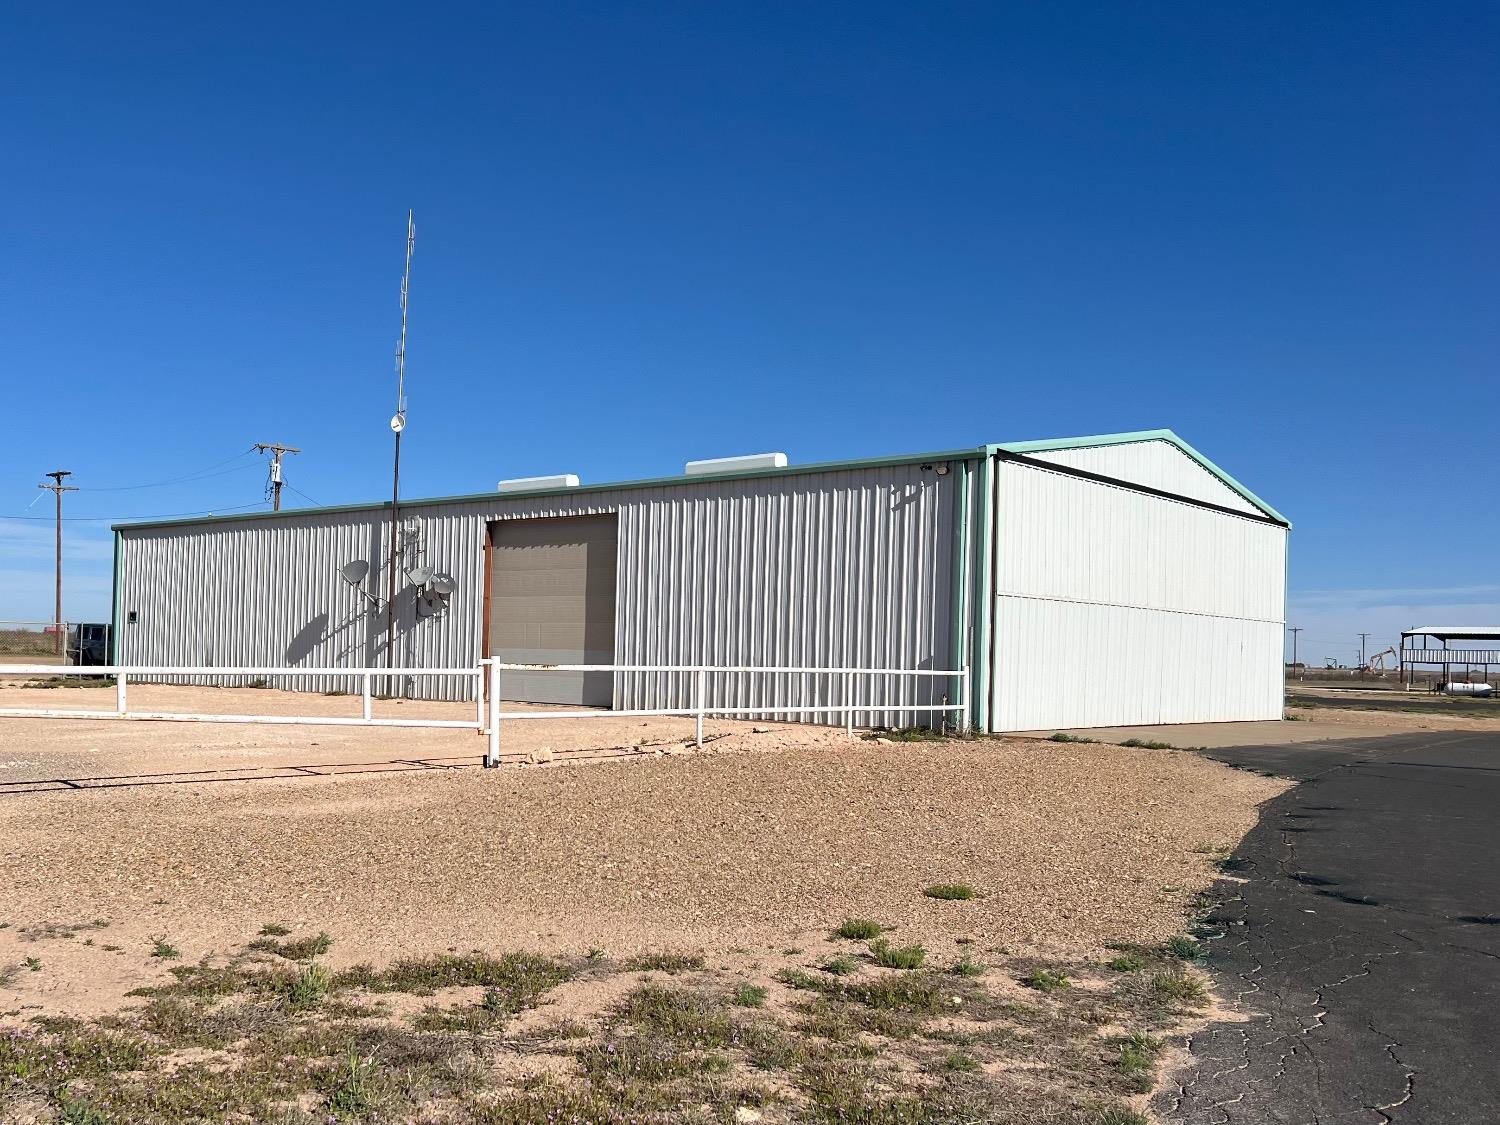 Amazing opportunity to own an Airplane hangar at the Yoakum County Airport. This Commercial Aircraft Hangar comes with Pilot's Lounge, two Private Offices, Pilot's Quarters with 3 bedrooms, living room, laundry room, 3 bathrooms and a kitchen.